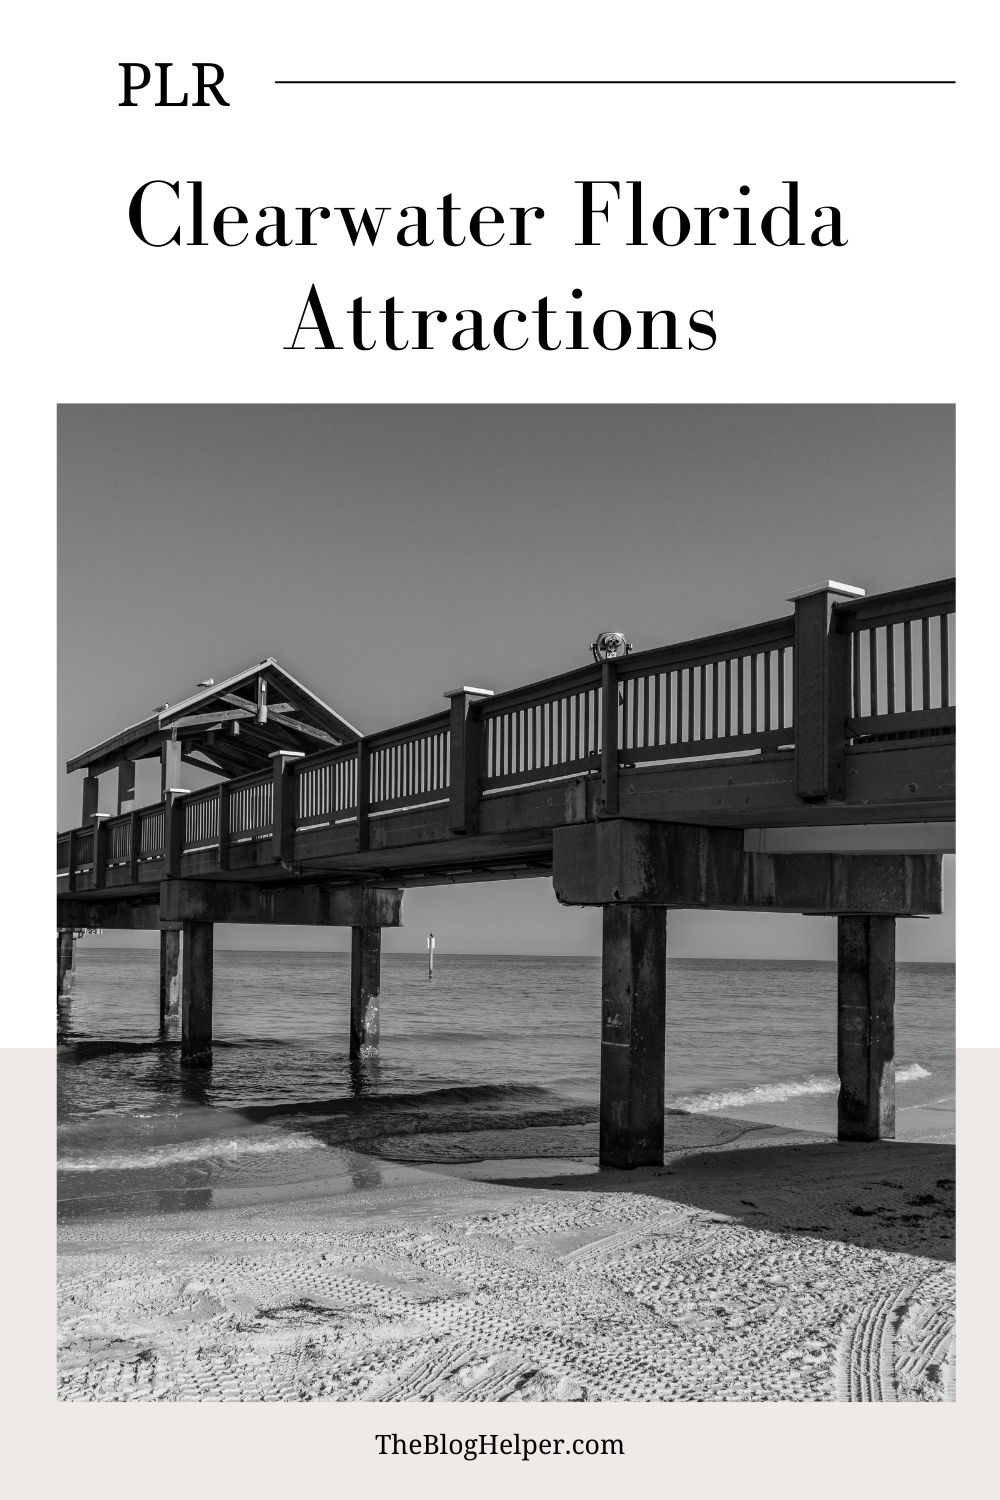 Clearwater Florida Attractions PLR #clearwaterflorida #florida #plr